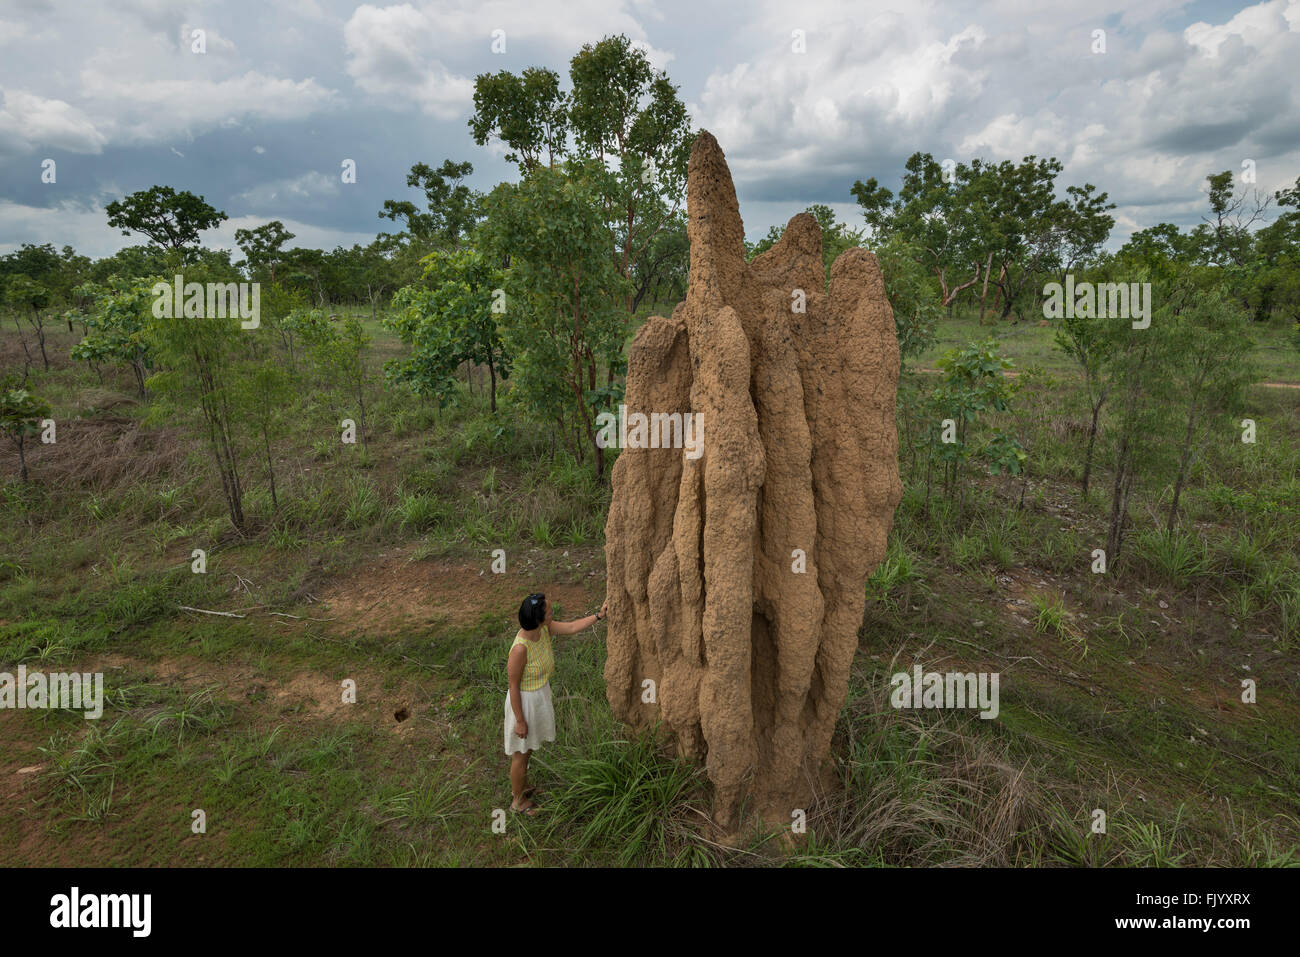 Very tall termite mound with tourist standing beside it to scale. Stock Photo